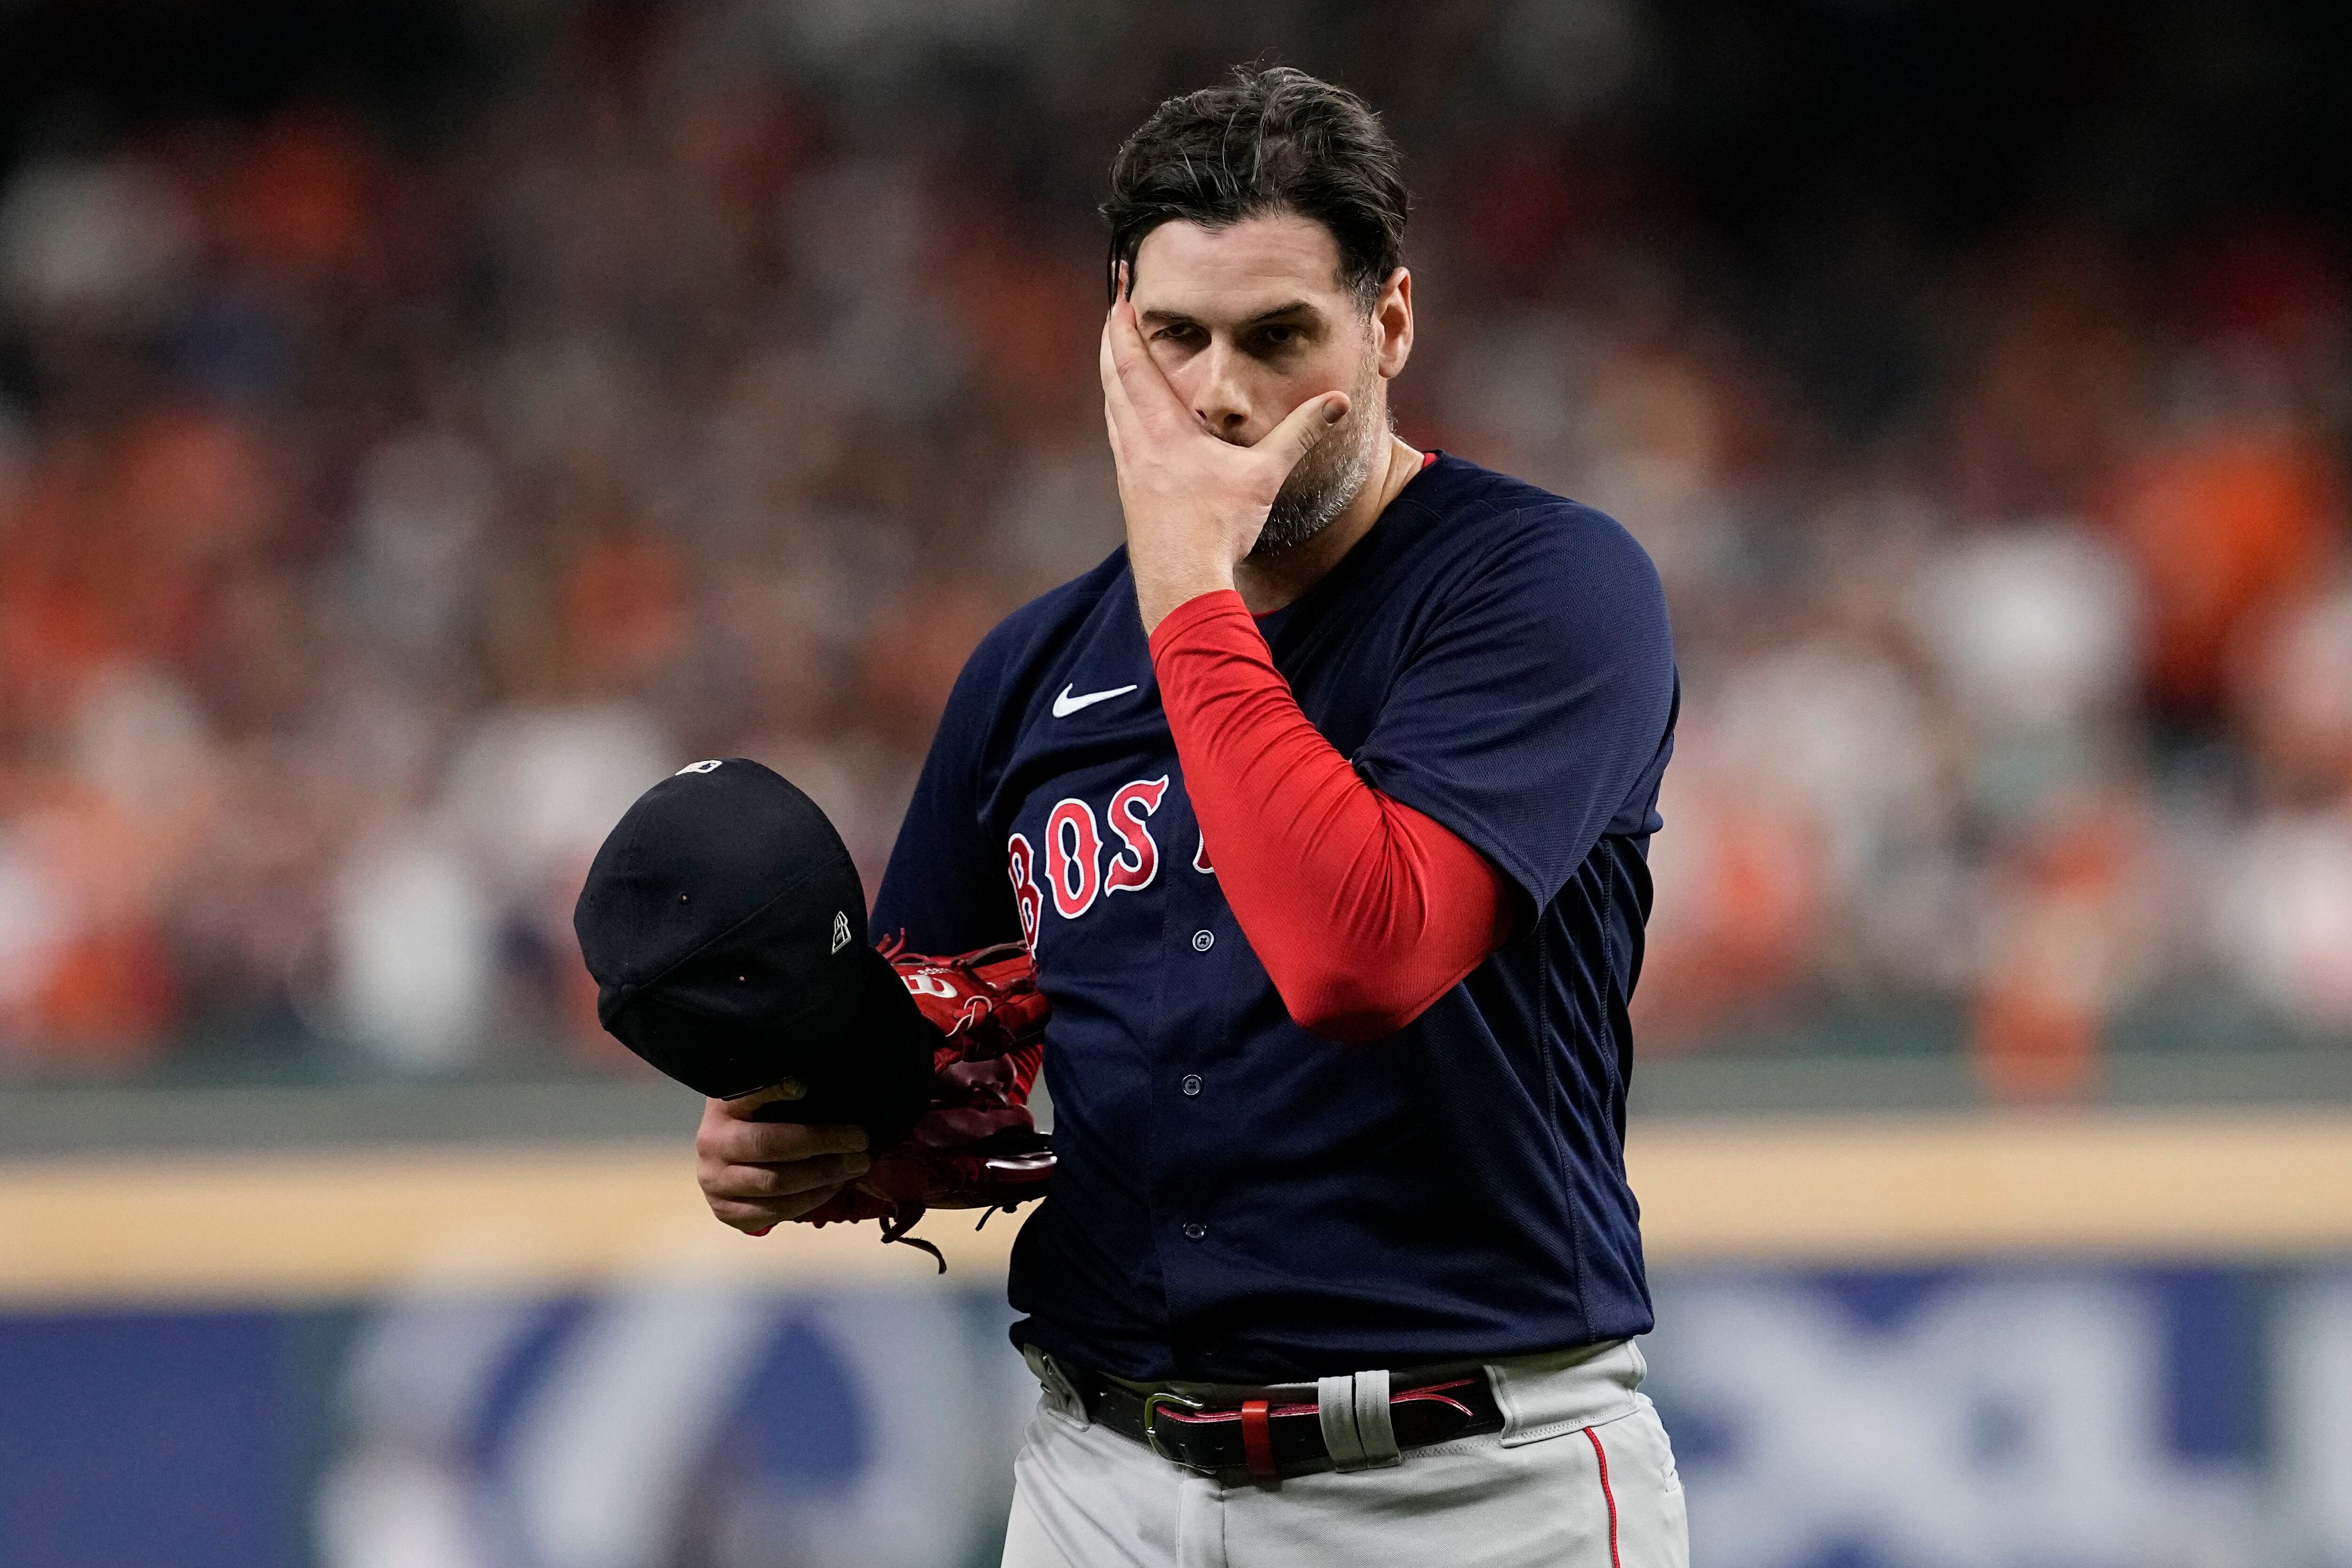 Twitter users react to Boston Red Sox reaching the World Series